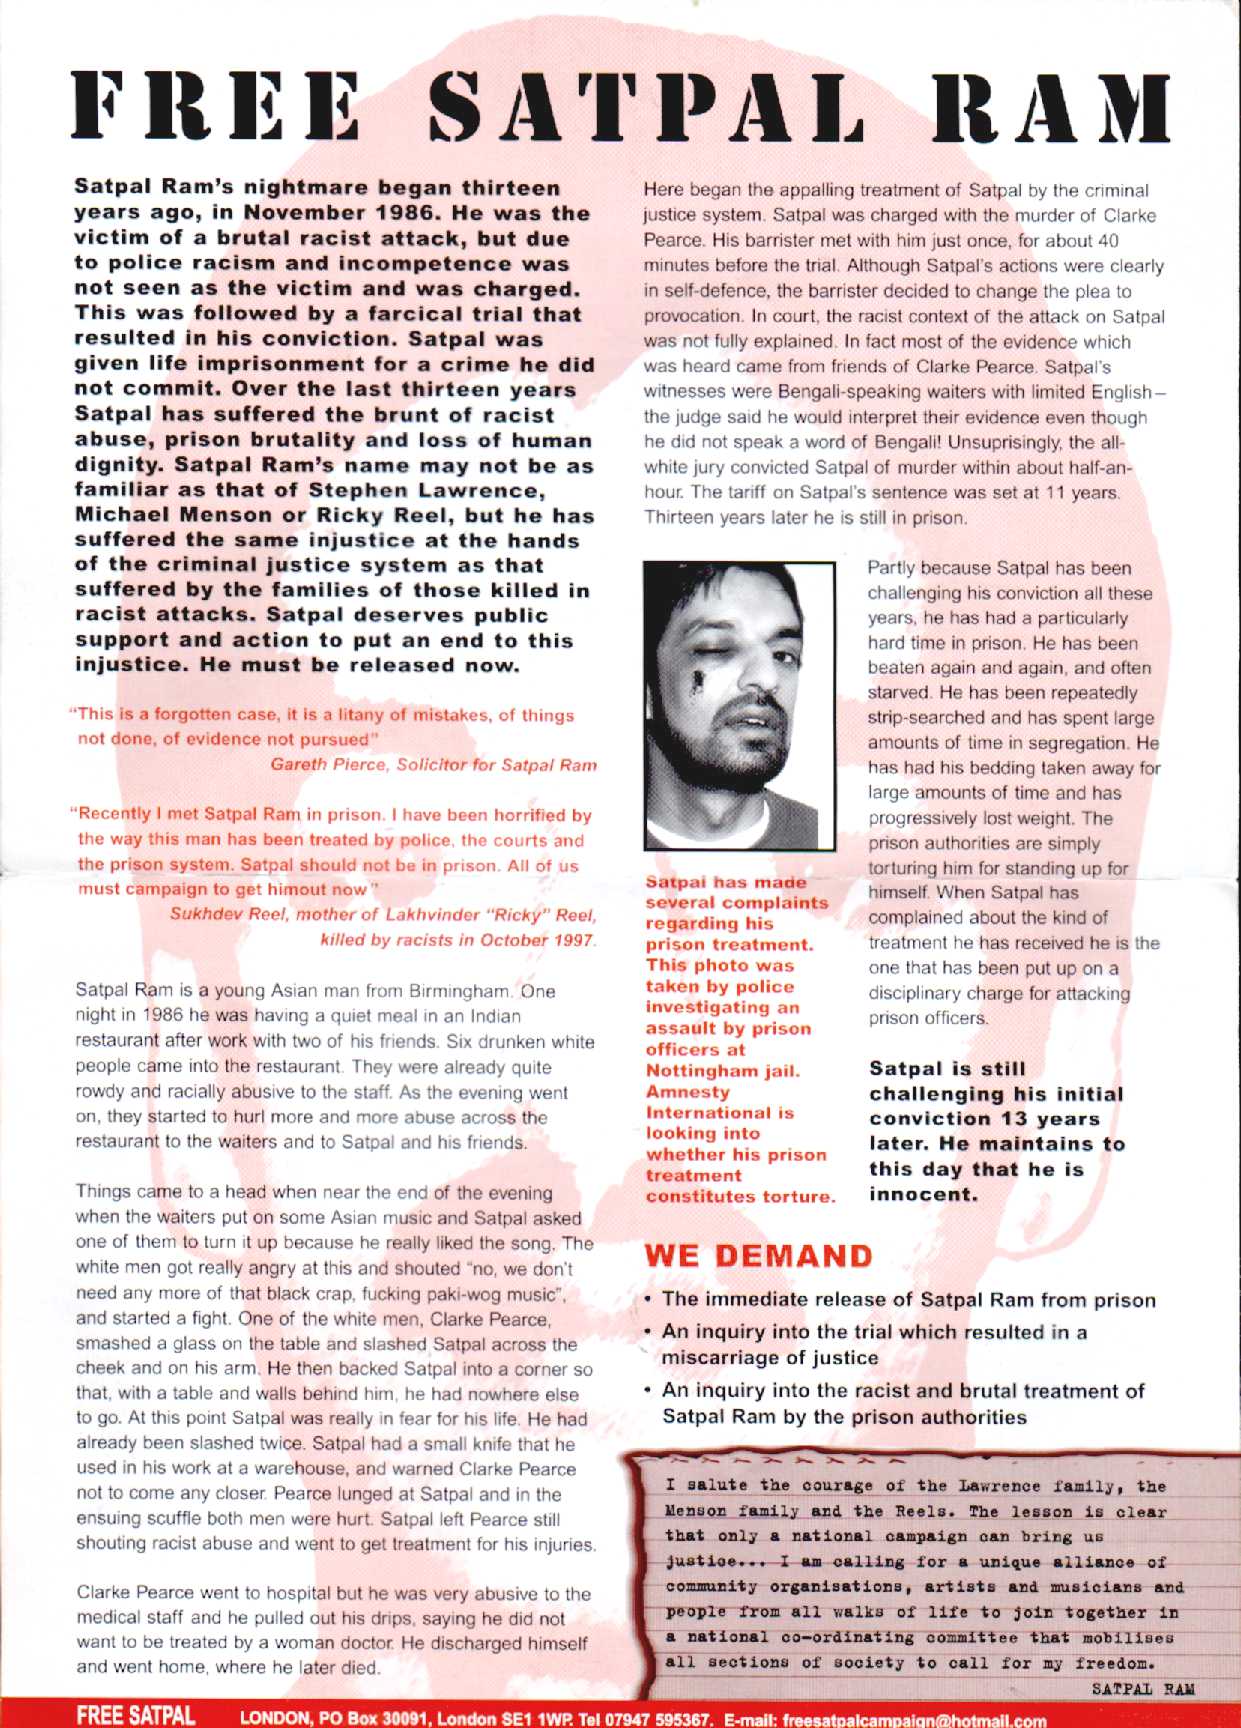 The lie ridden leaflet published by the Free Satpal Campaign